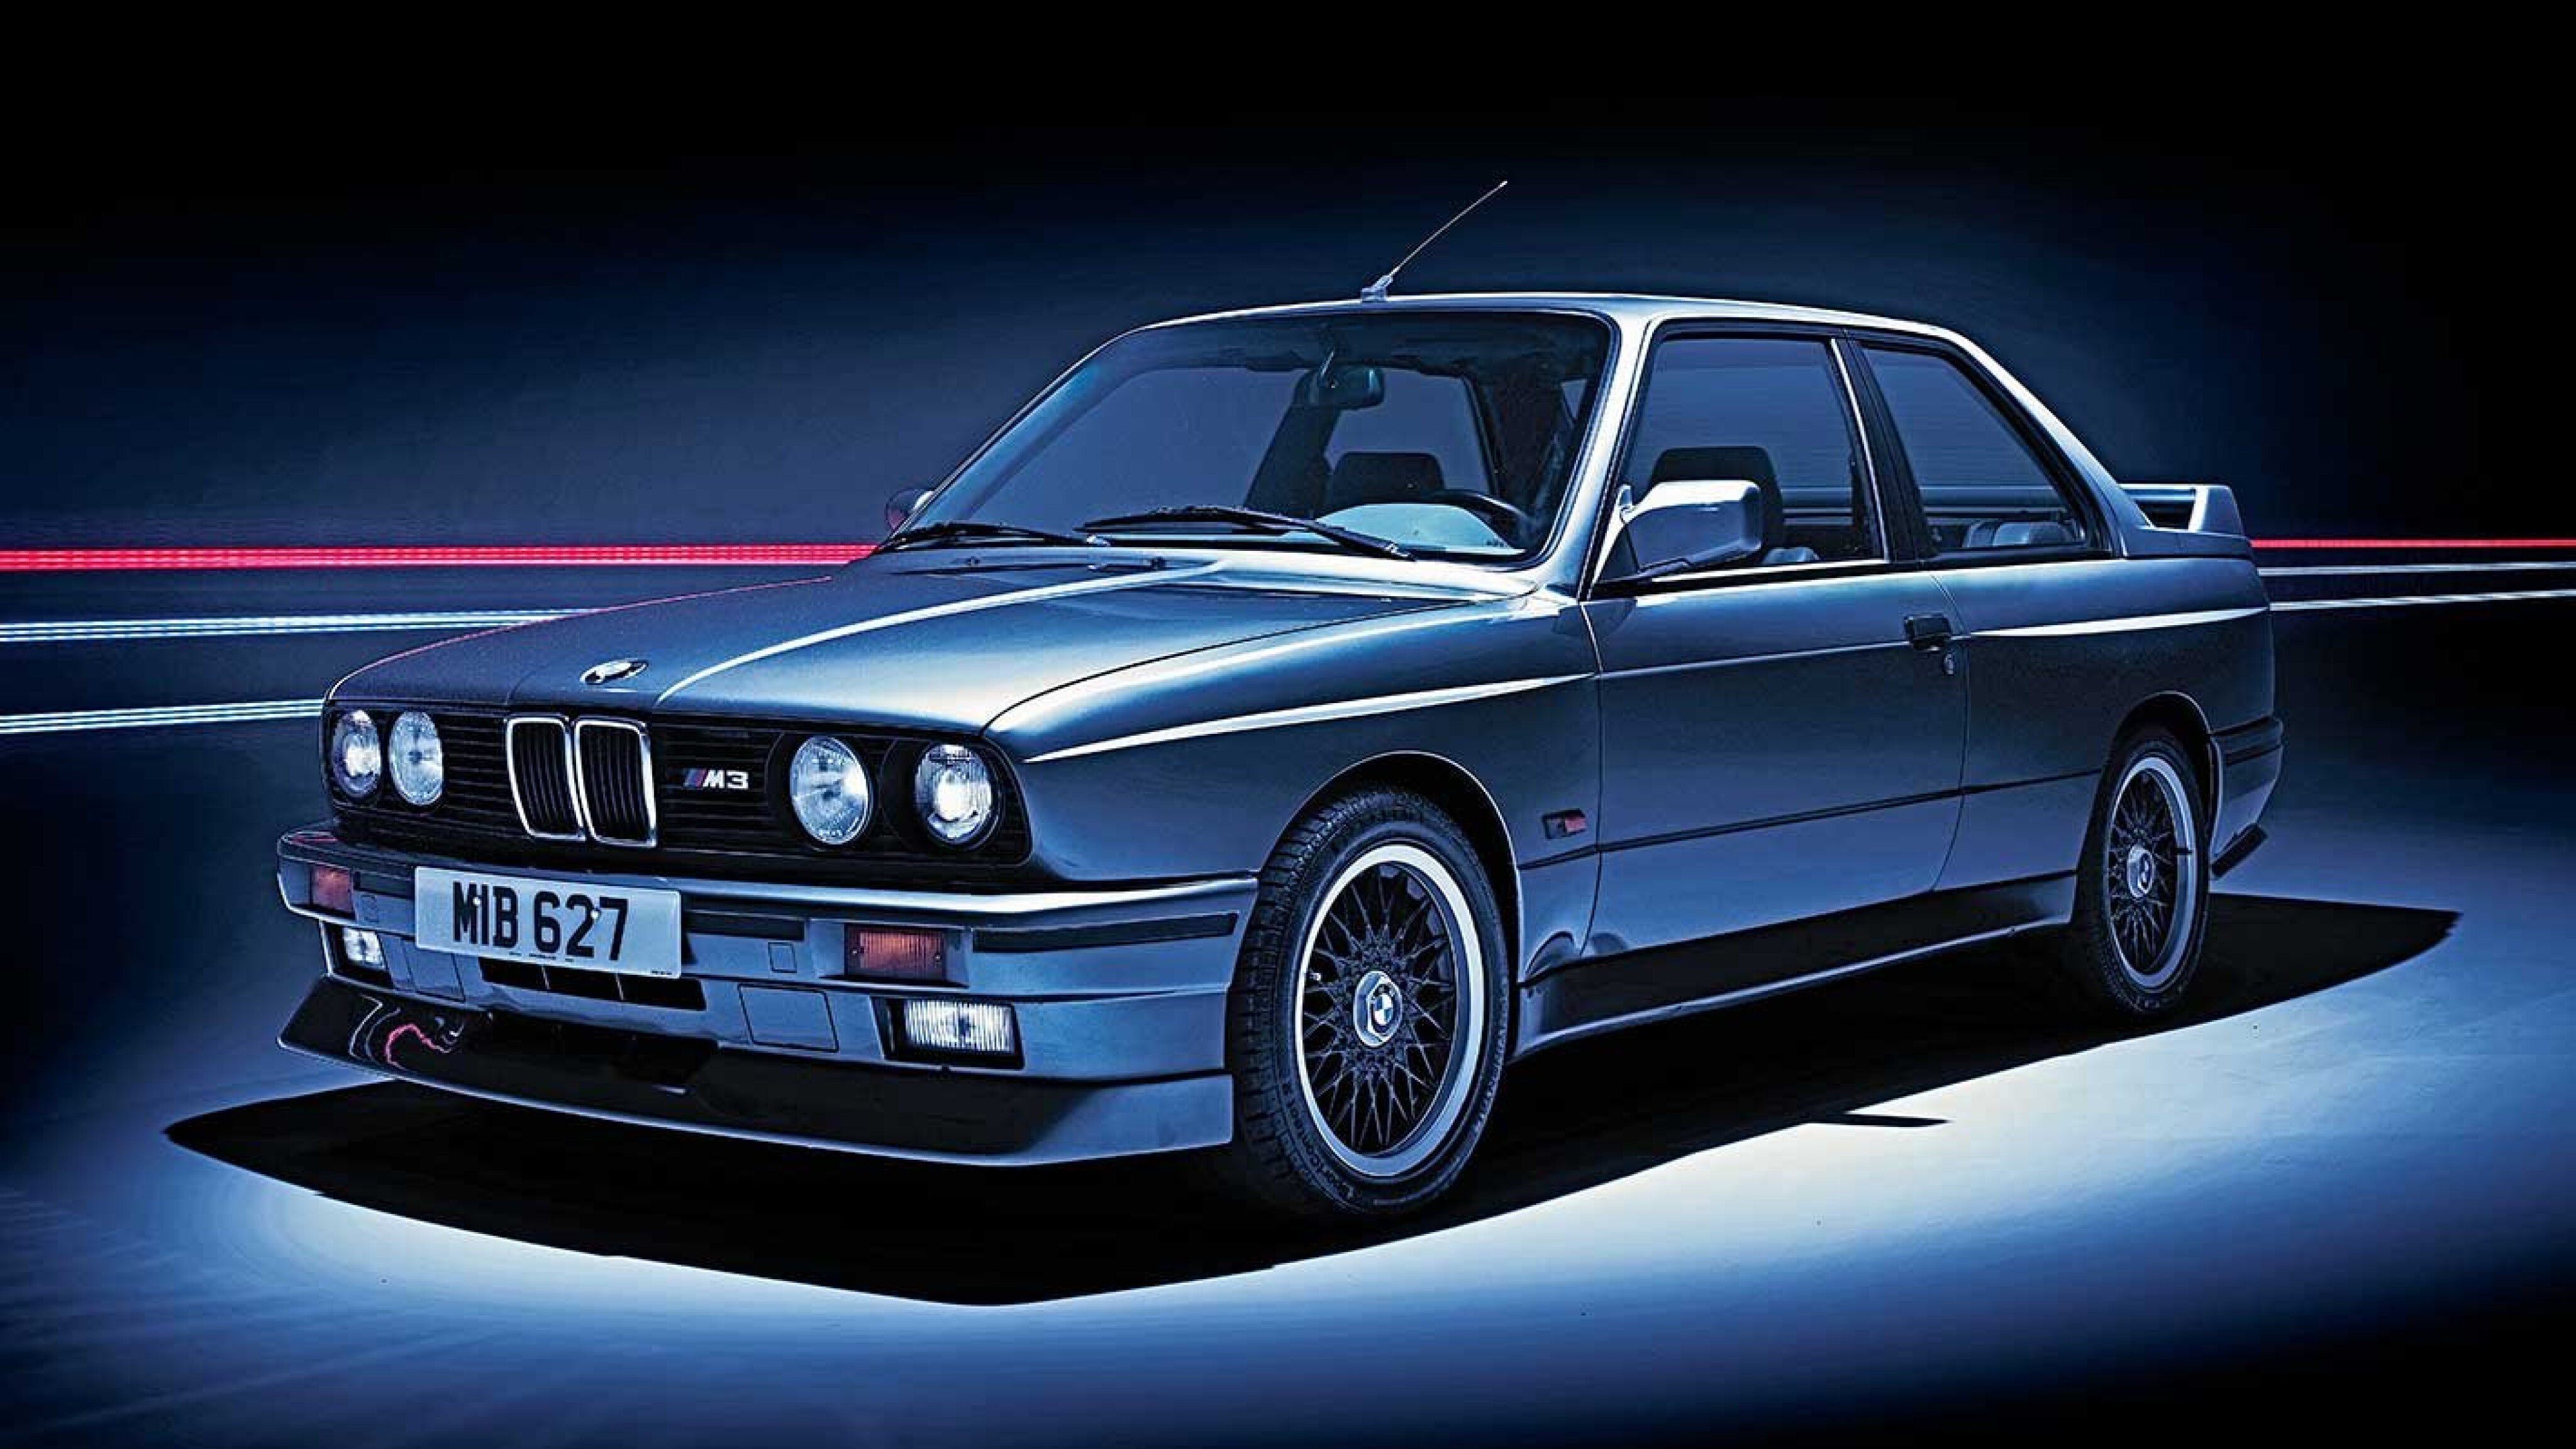 BMW E30 3 Series Buyers Guide - Why Should You Buy One Today